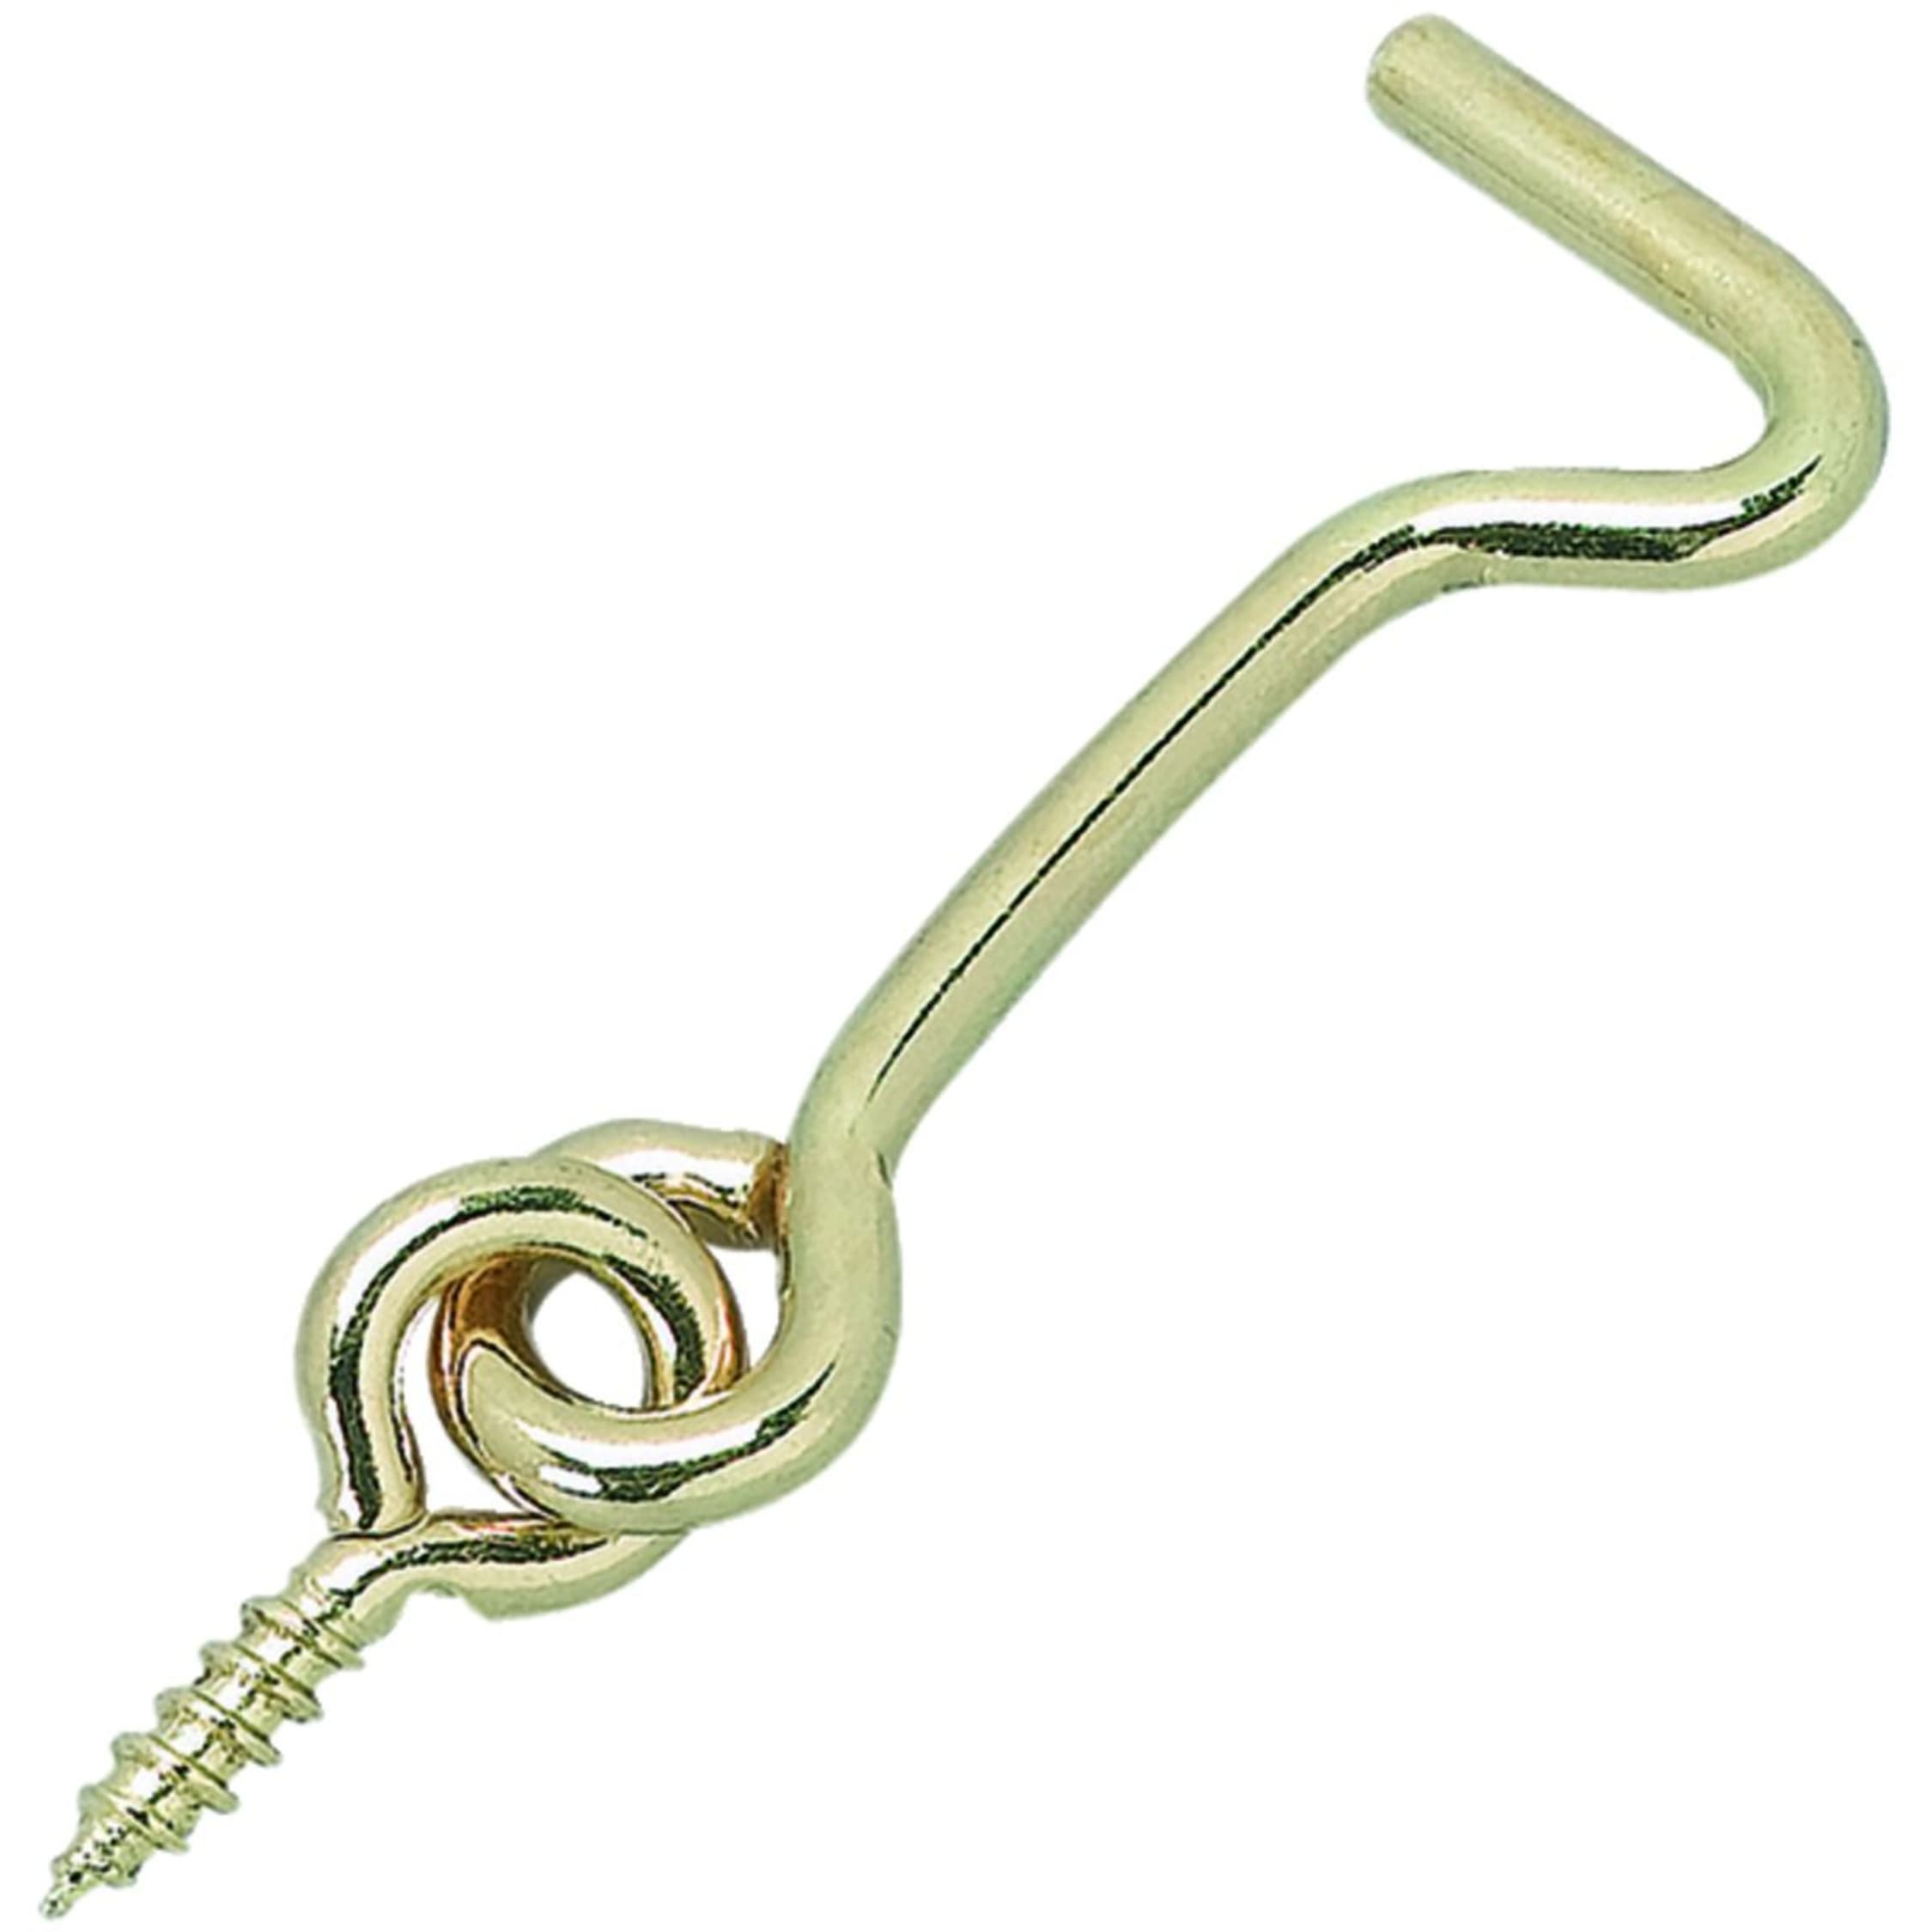 Everbilt 2 in. Stainless Steel Hook and Eye 13603 - The Home Depot